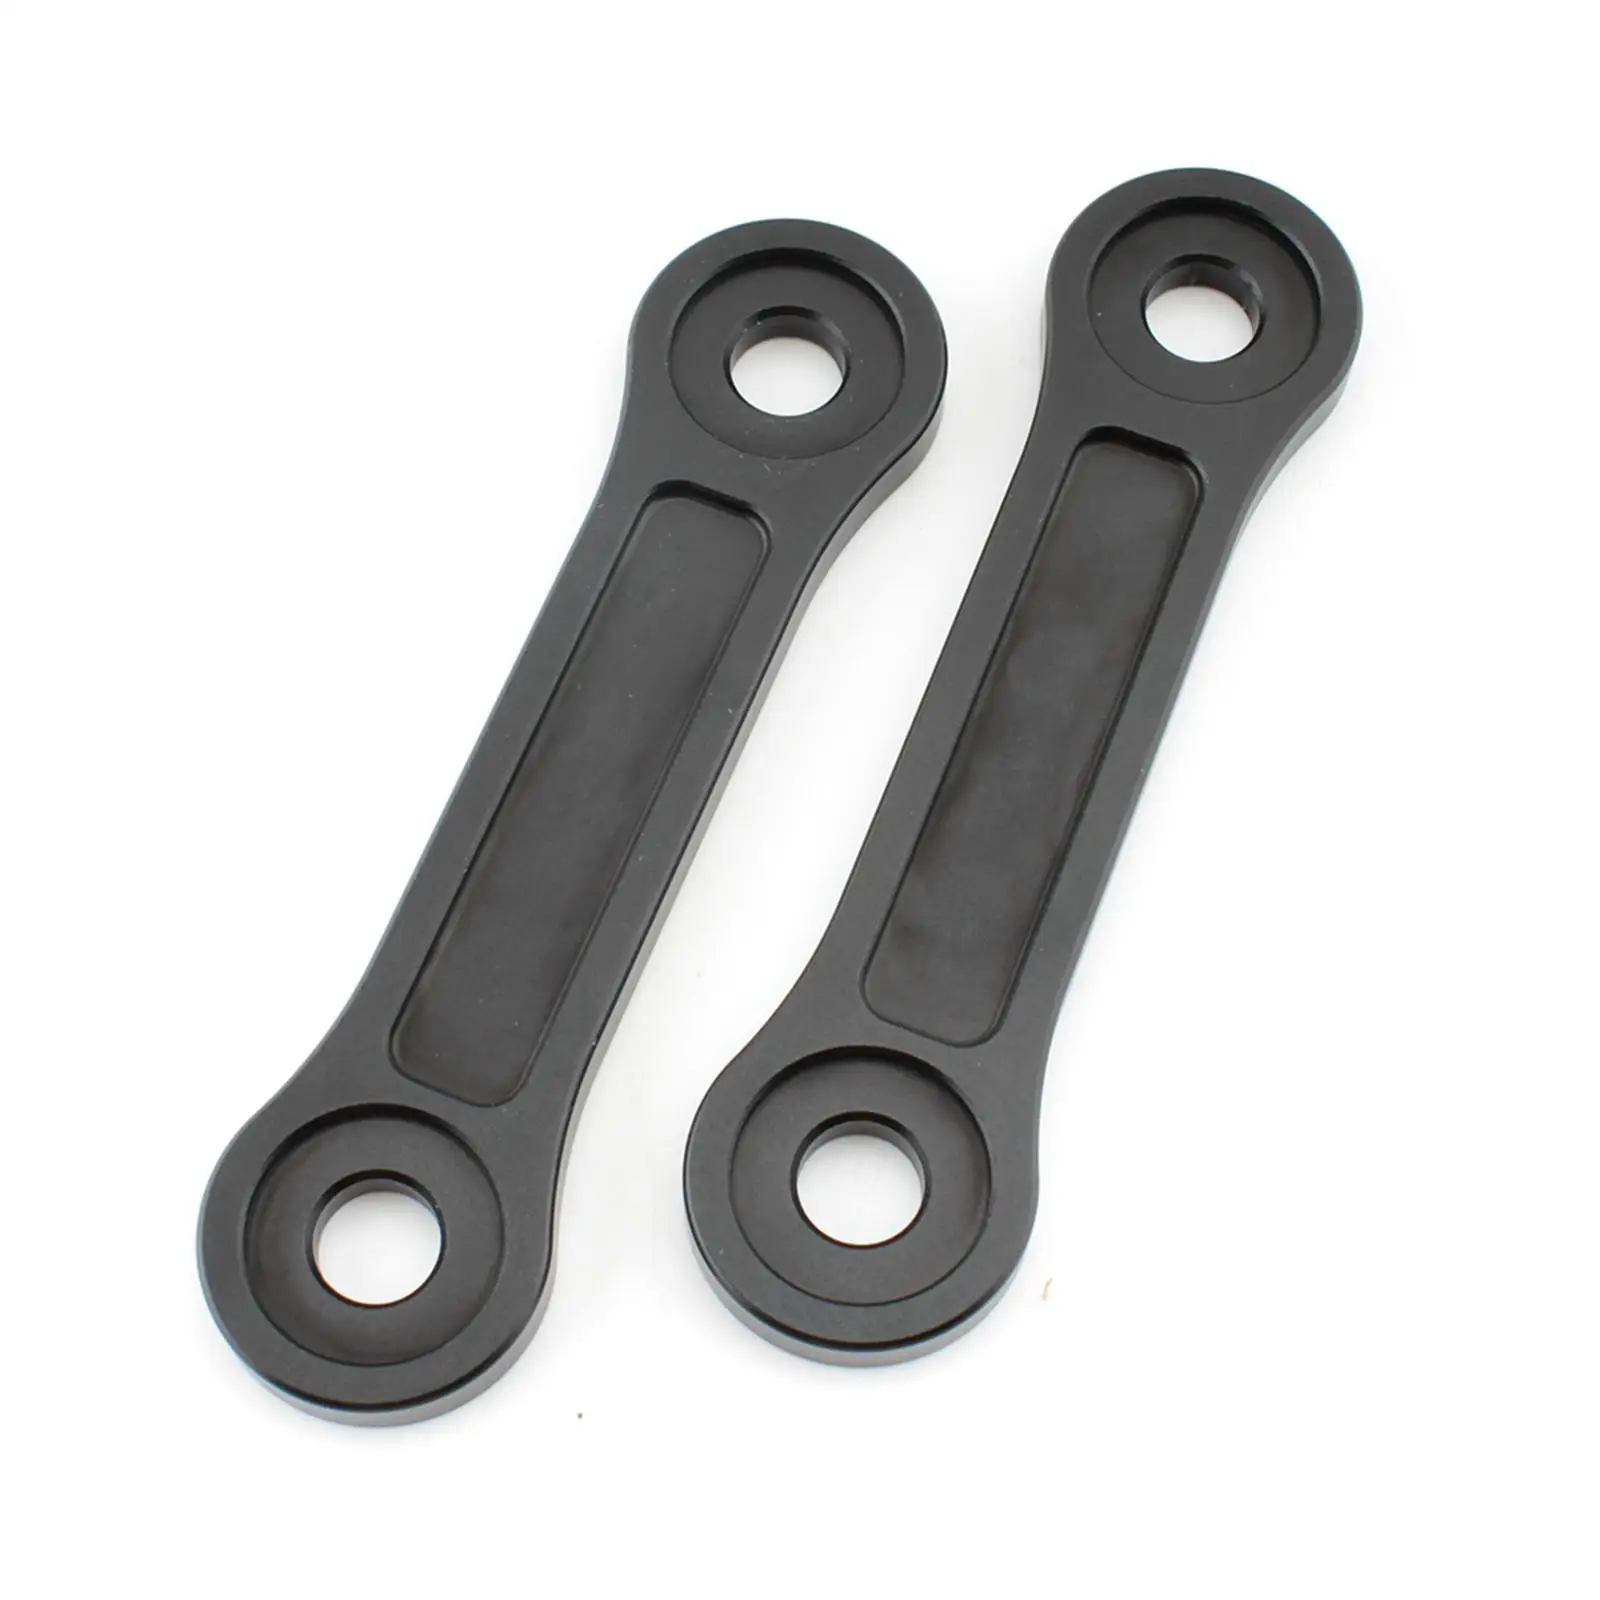 2x Motorcycle Lowering Links Kit Black Assembly Suspended Link Linkage Drop Link Kit for Tiger1200 GT Pro Rally Explorer